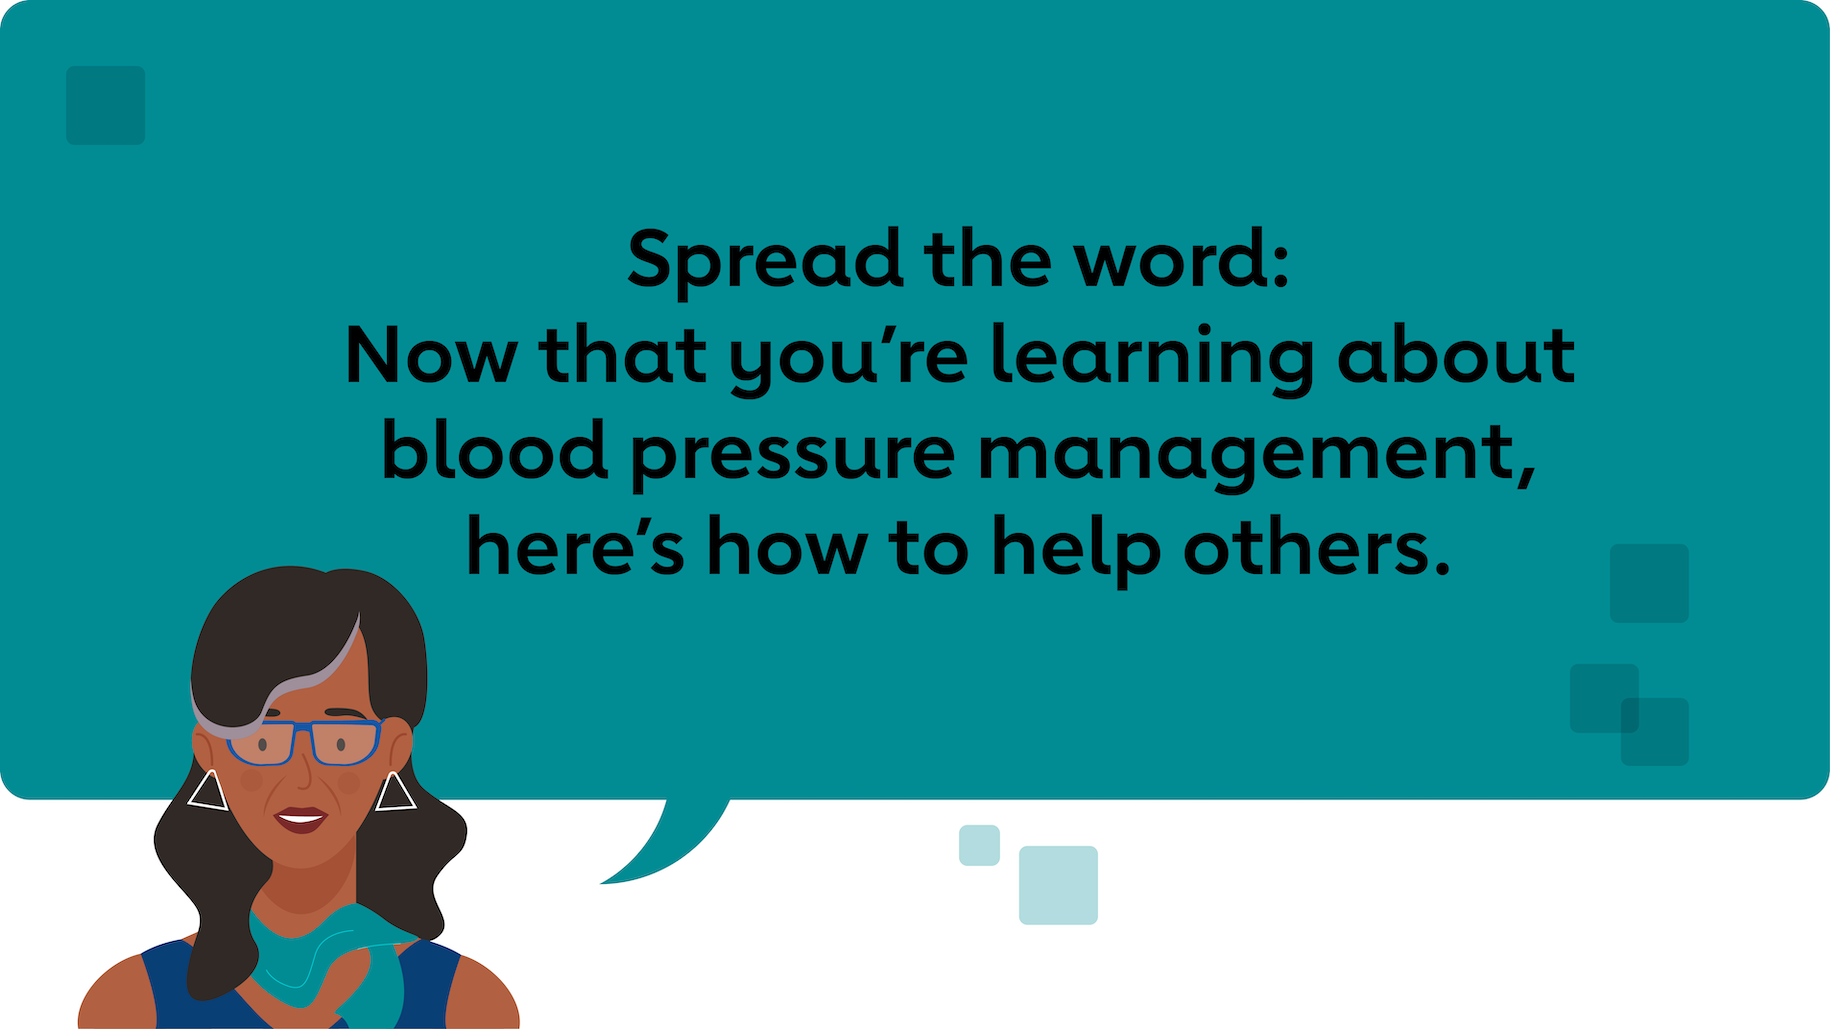 Spread the word: Now that you’re learning about blood pressure management, here’s how to help others.